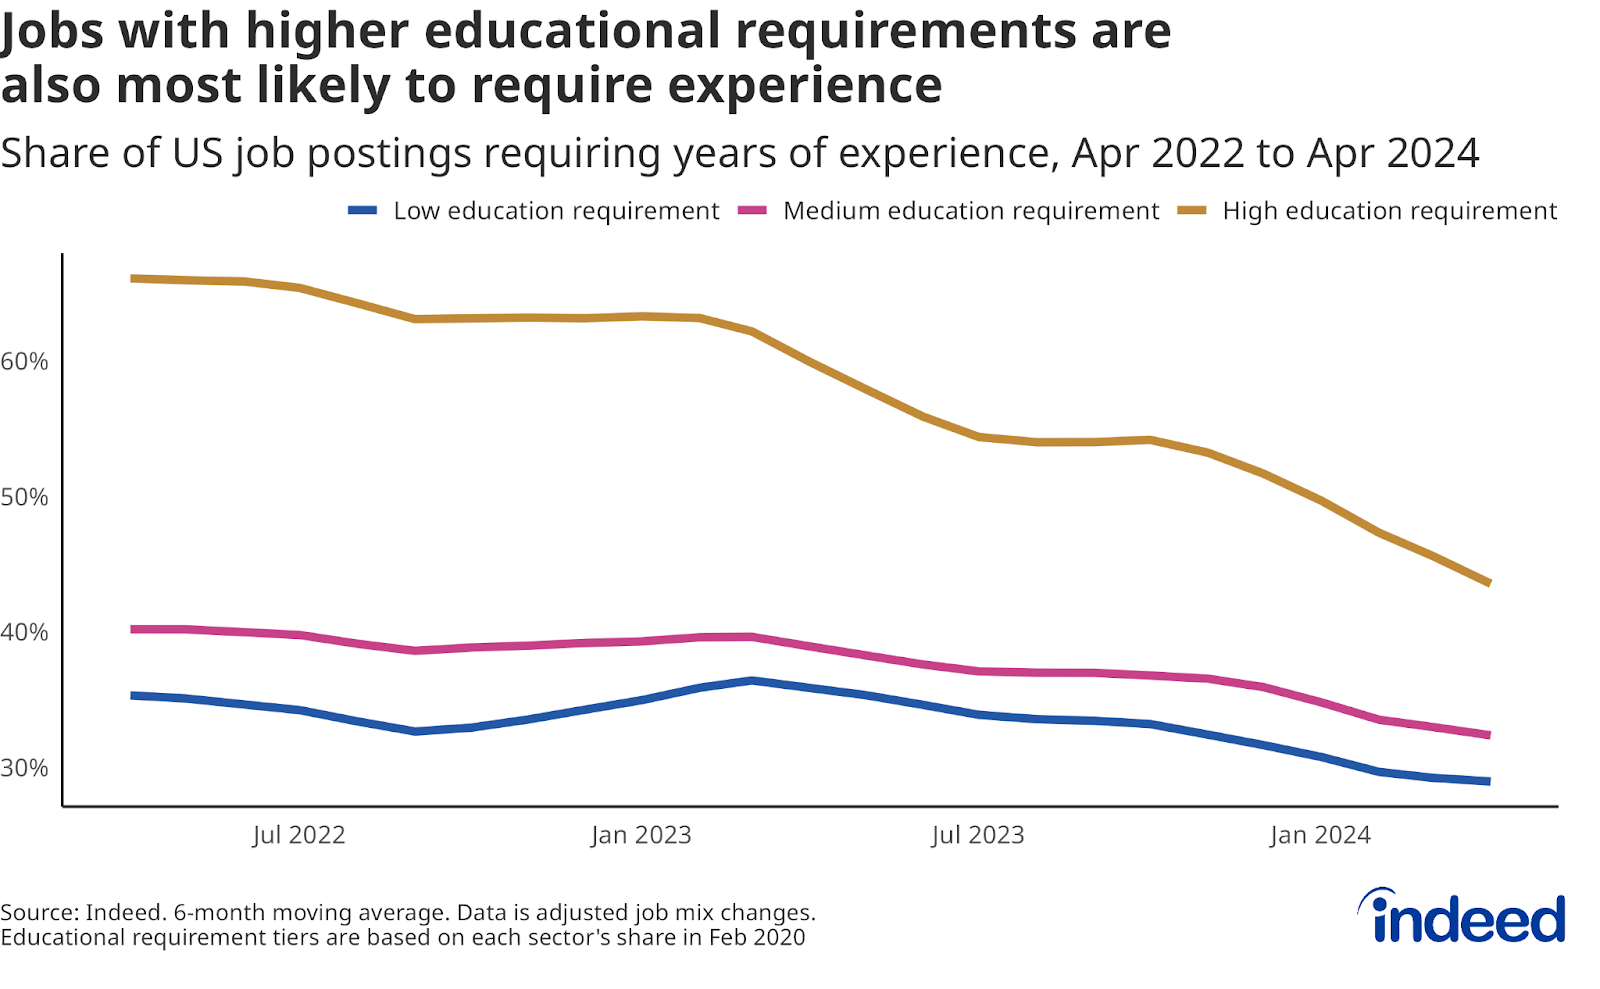 A line graph titled “Jobs with higher educational requirements are also most likely to require experience” shows that the share of US job postings with a year-specific experience requirement is falling fastest for jobs with a high education requirement. 